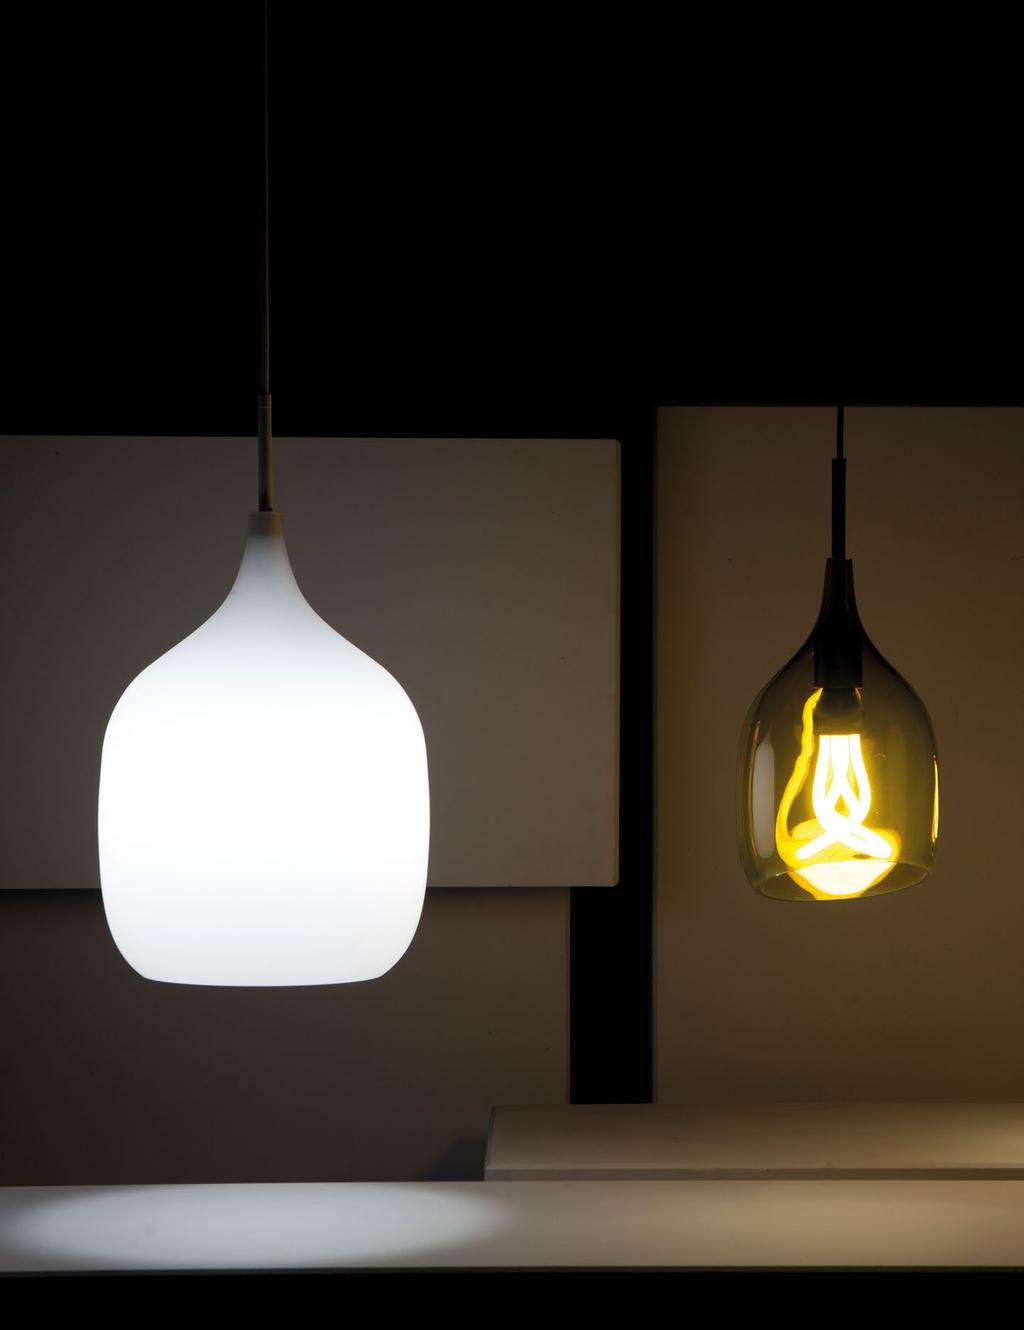 030 Collection 031 Collection Influenced by the original Limited Edition Series, the Vessel pendant and occasional light has been designed to celebrate the Plumen 001 bulb, and more recently the